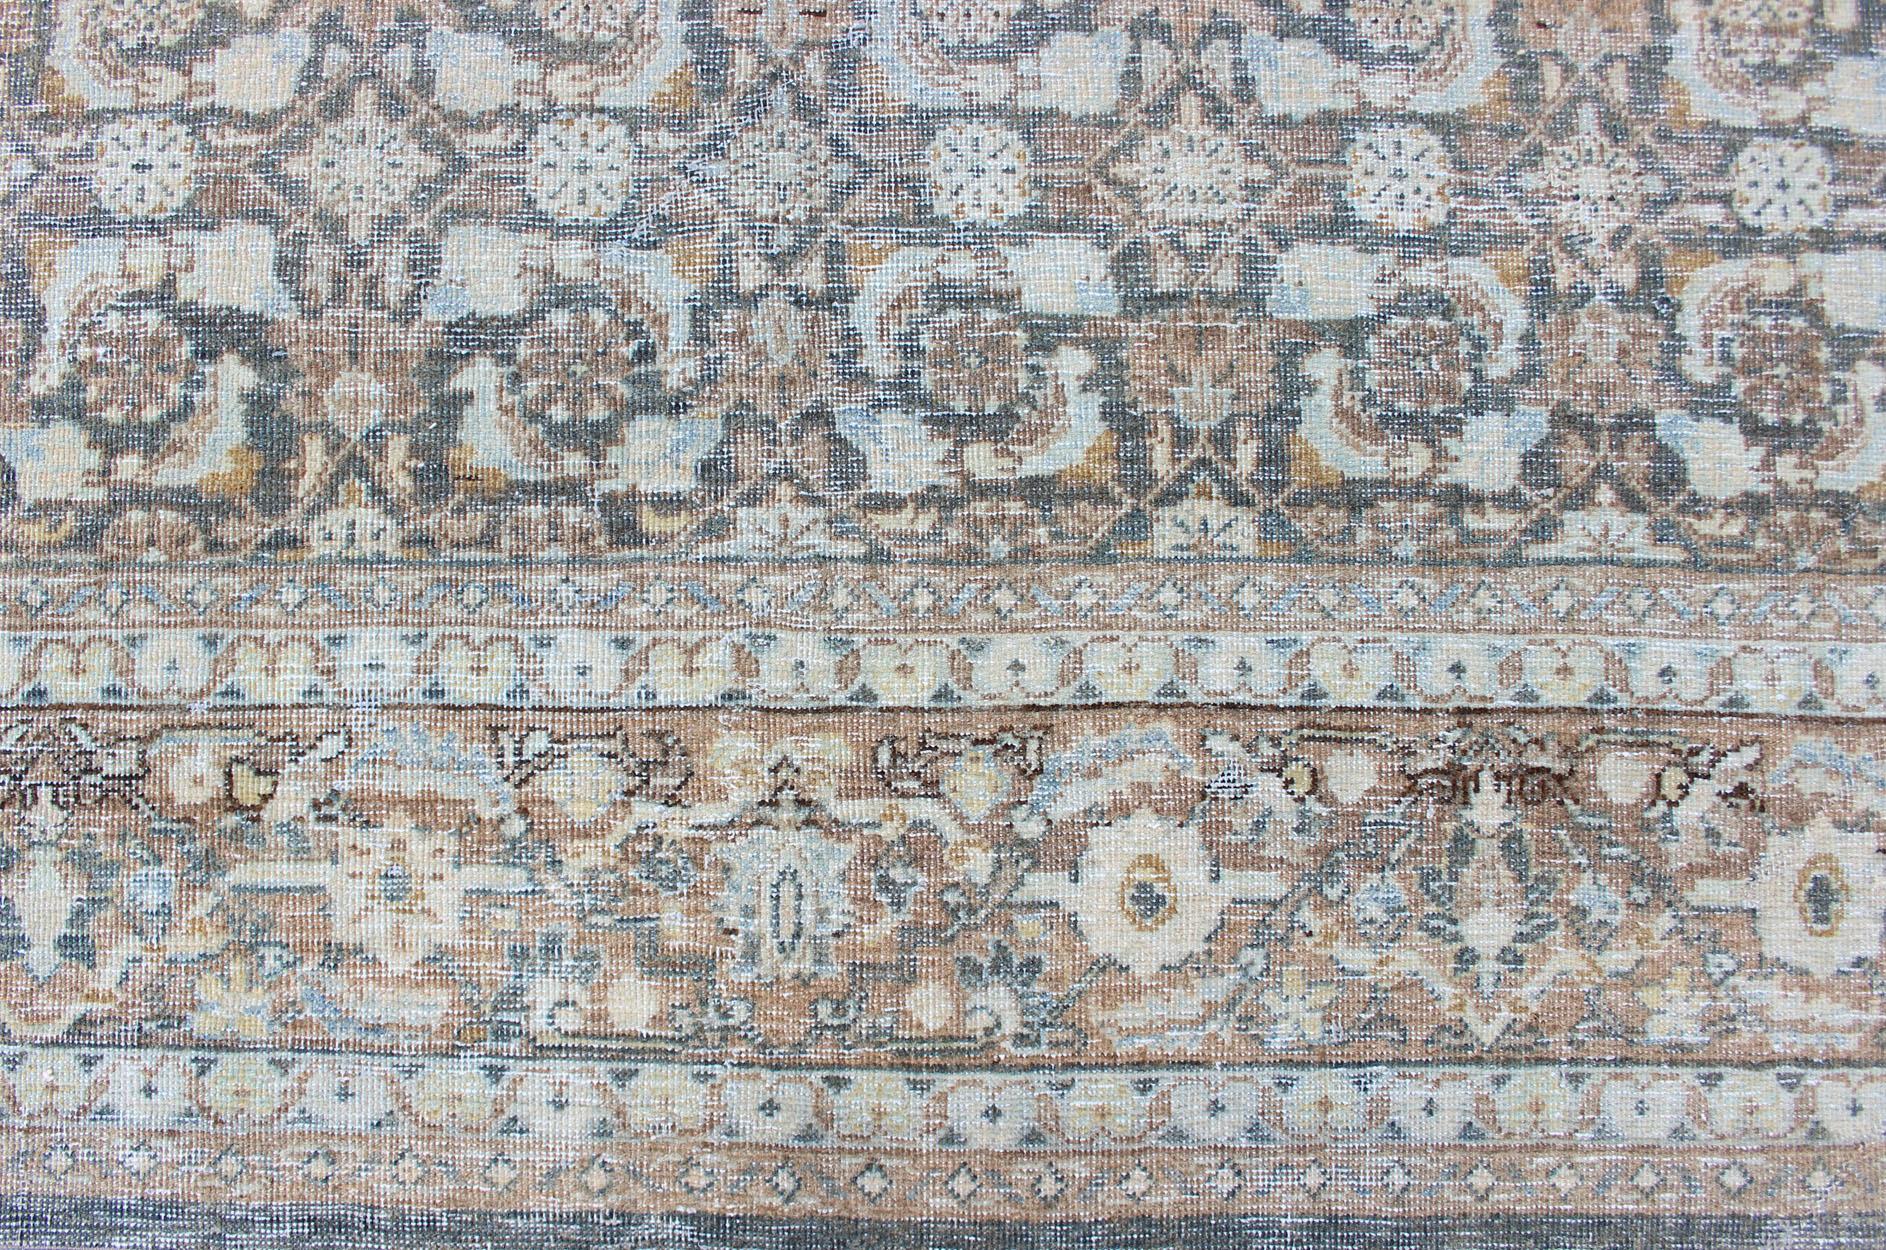 Antique Persian Sultanabad Distressed Rug in Blue, Blue Gray and Light Brown 9